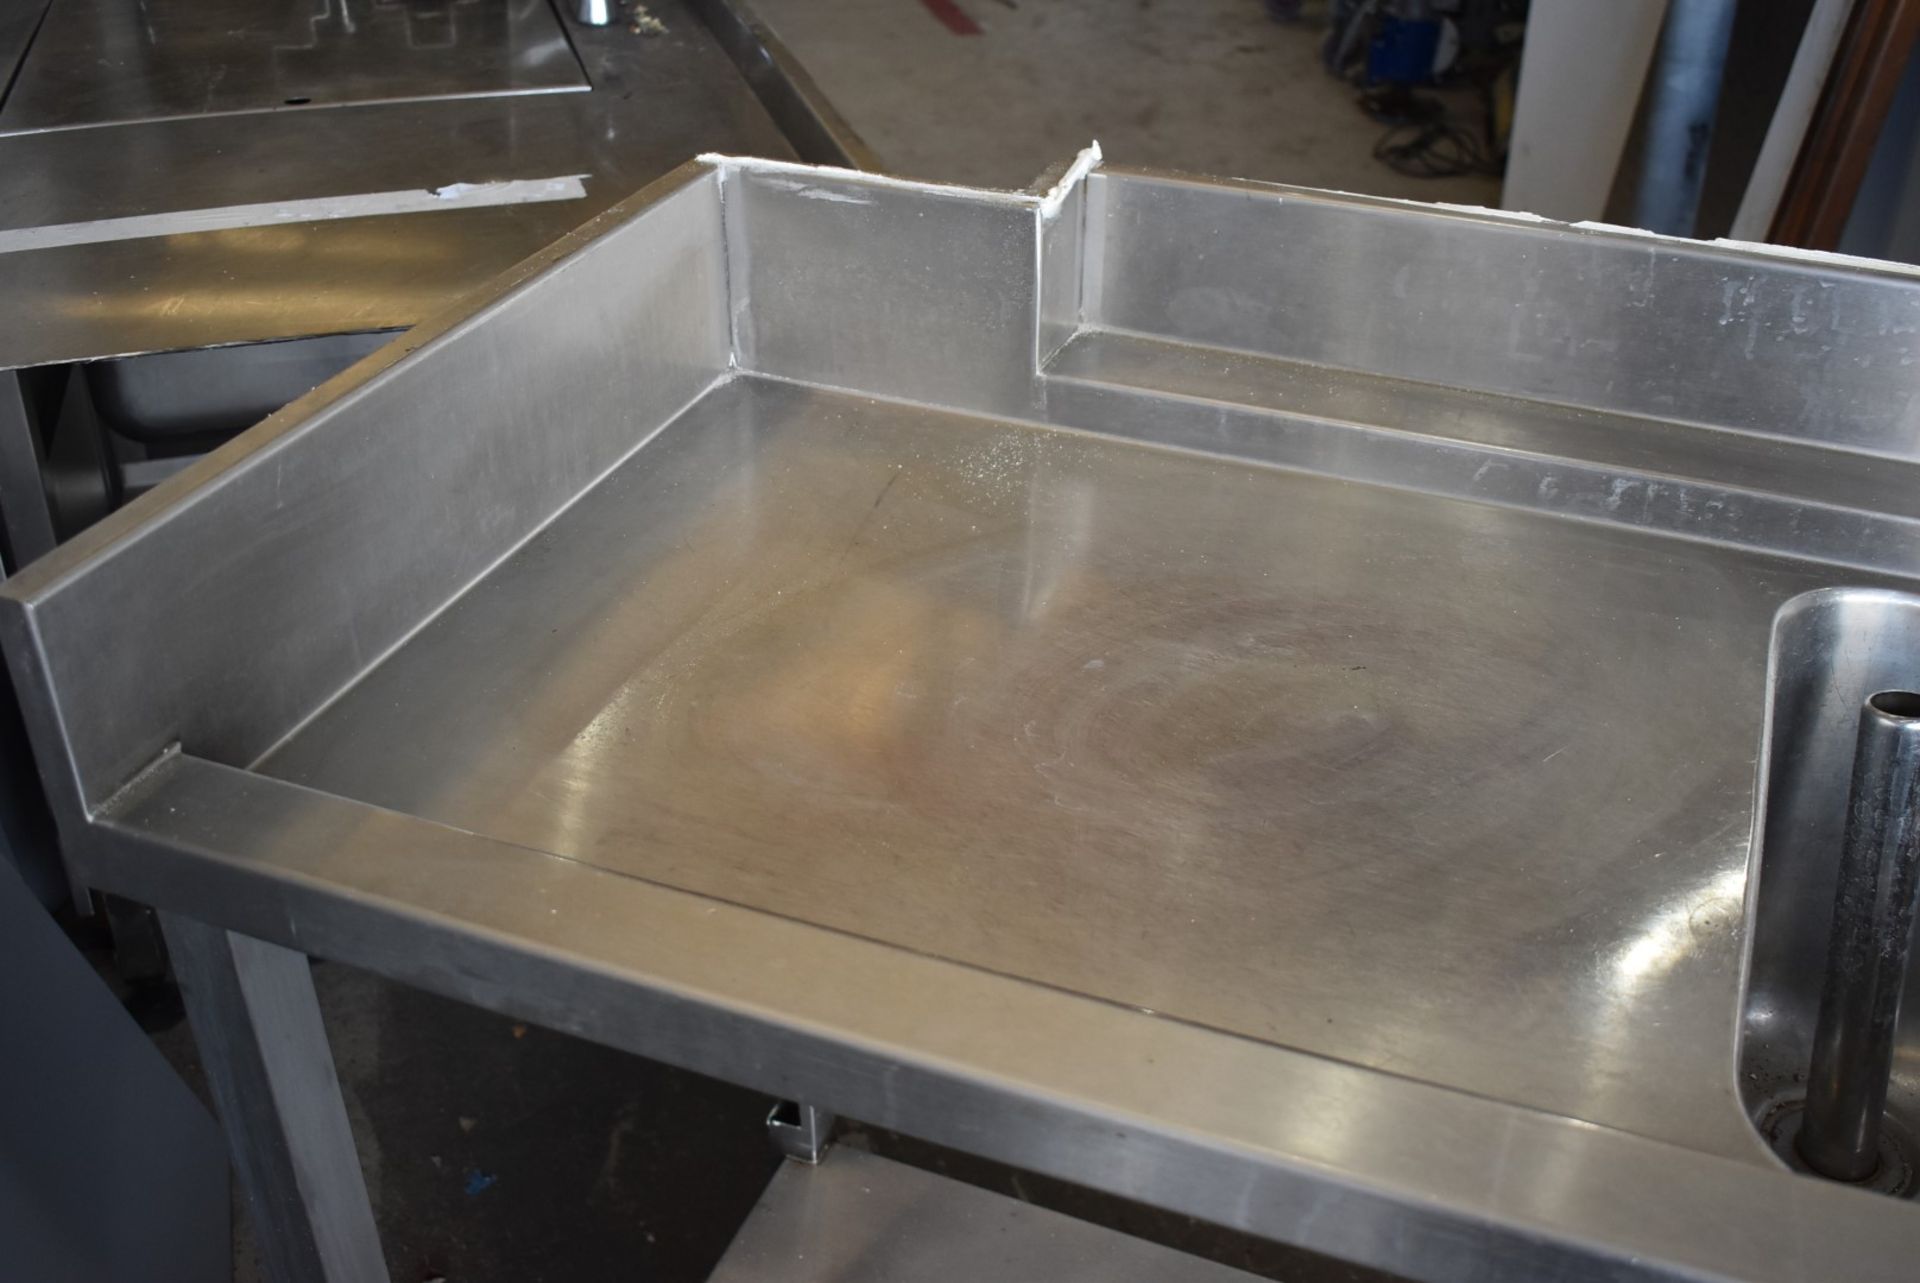 1 x Stainless Steel Wash Unit With Single Basin, Mixer Tap, Undershelf, Corner Upstand - Width 190cm - Image 3 of 11